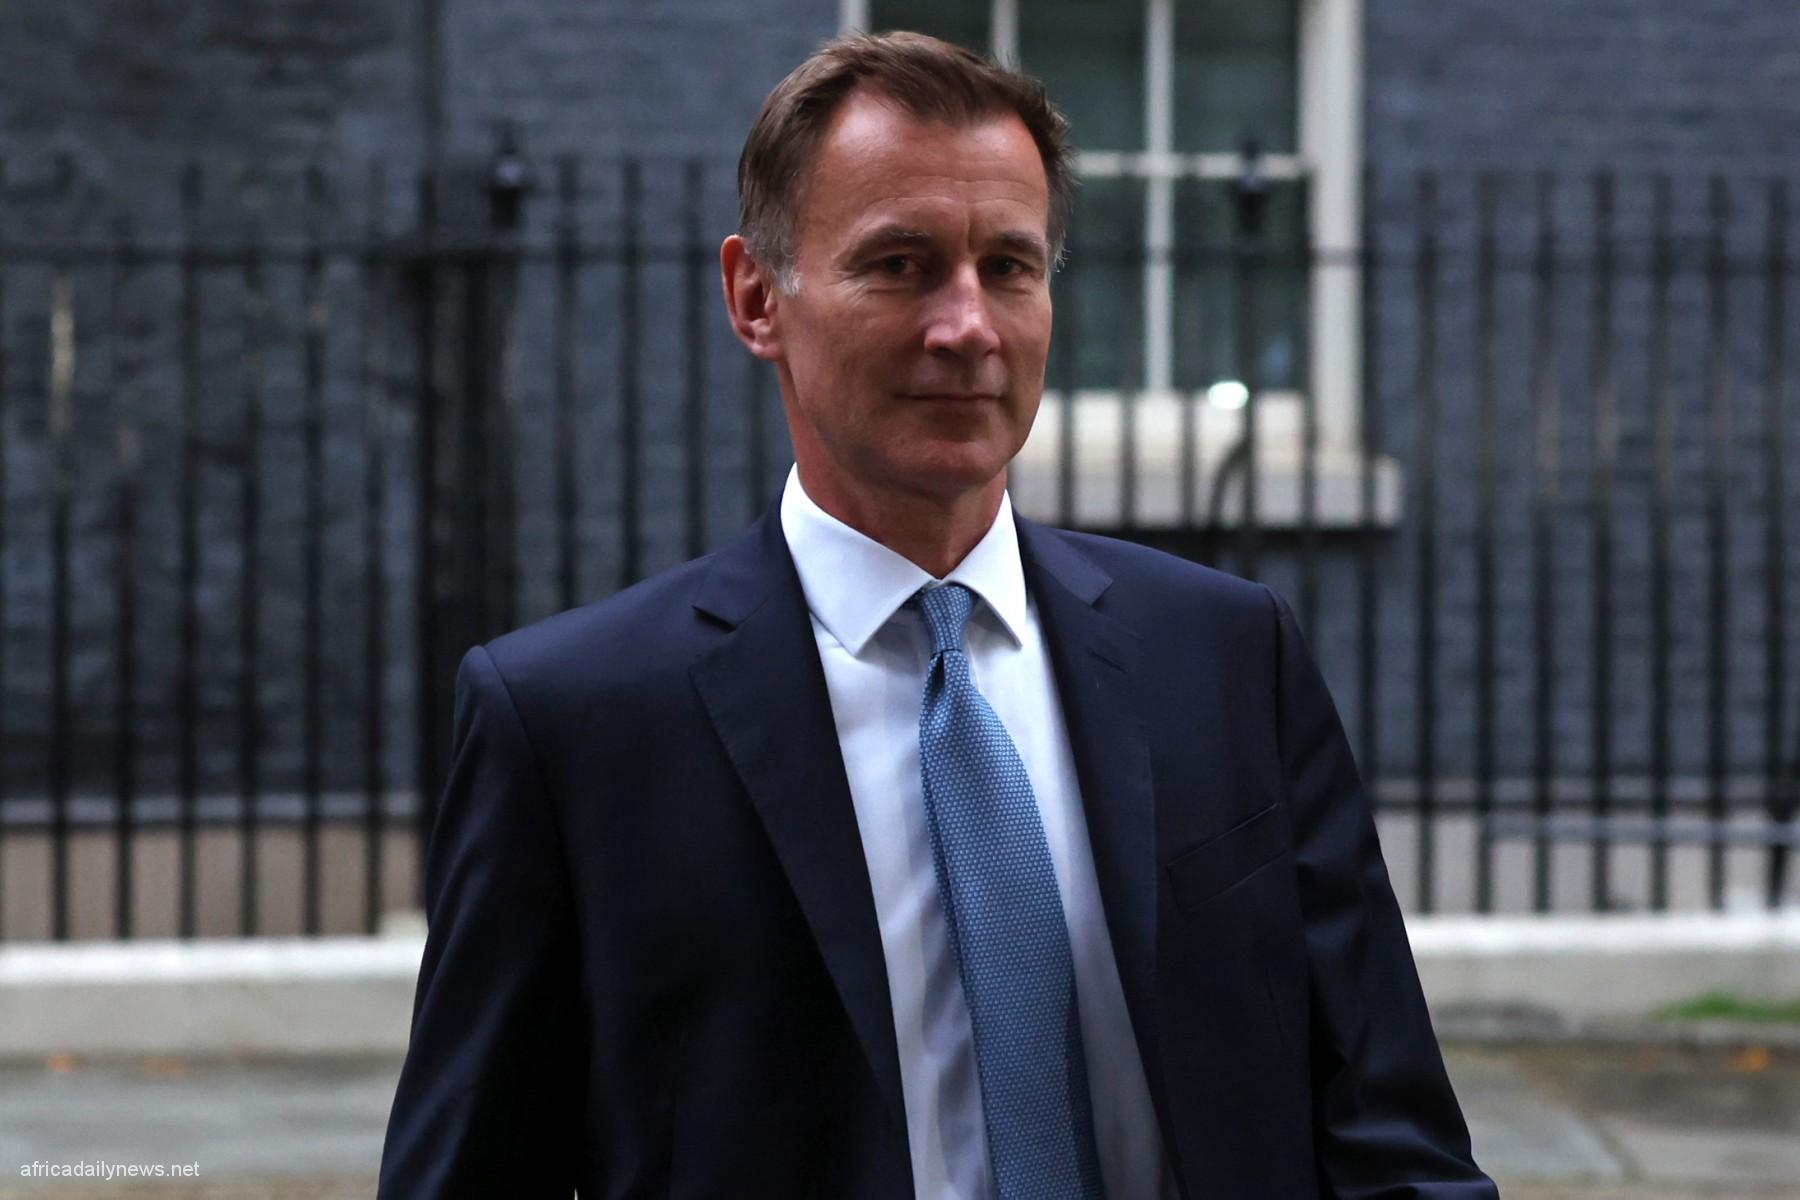 New UK Finance Minister Faults, Disagrees With PM’s Agenda